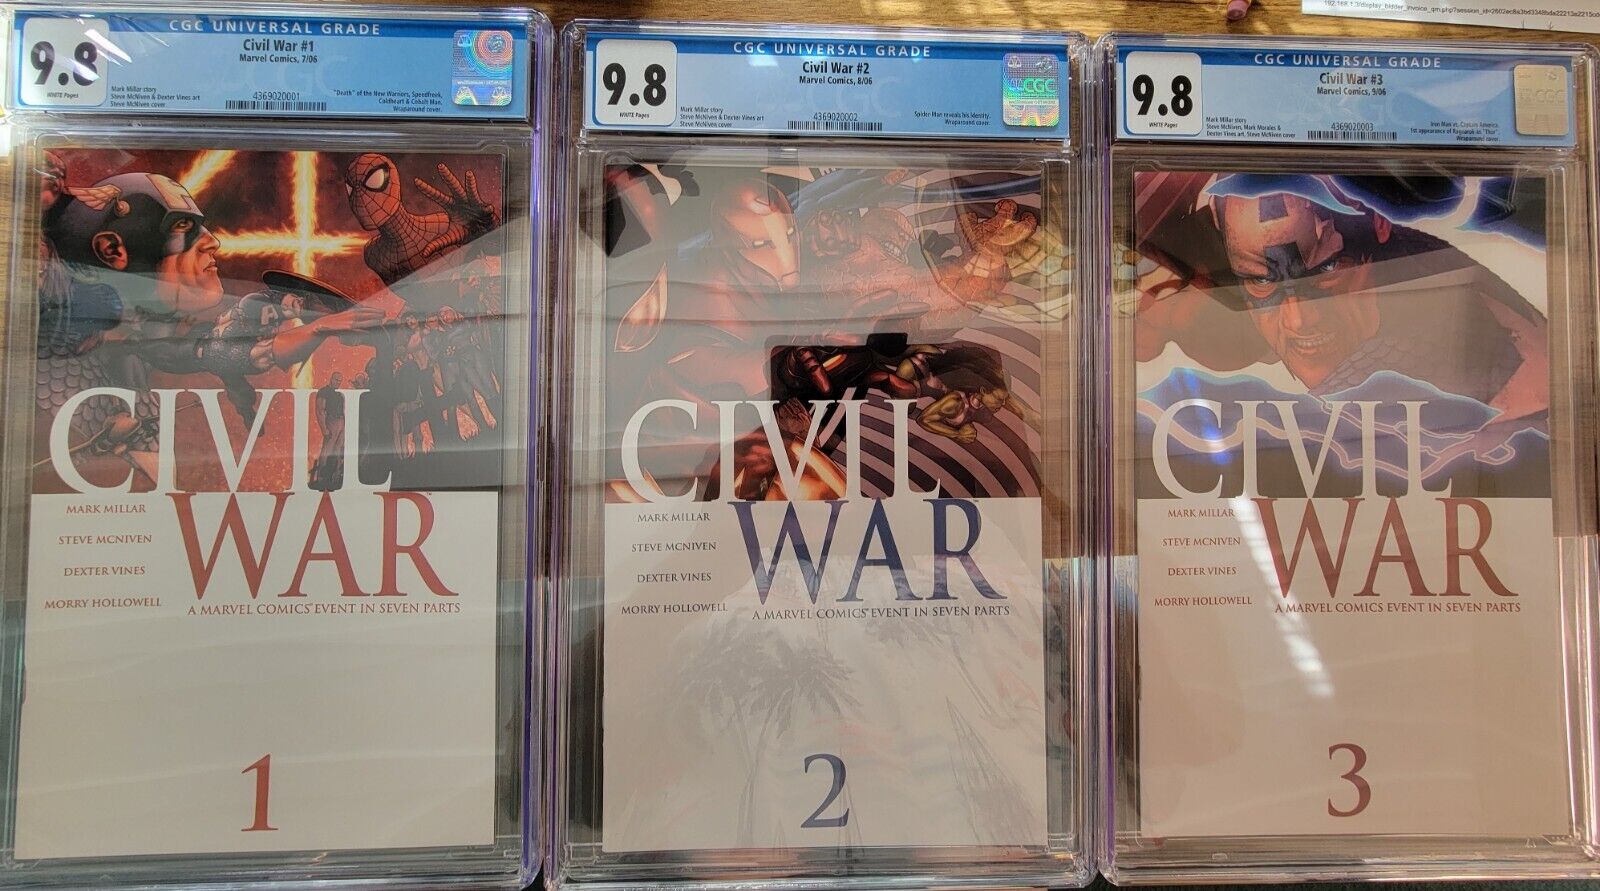 Marvel Civil War 1-7 with 1-3 Slabbed with CGC 9.8, the rest bagged and boarded